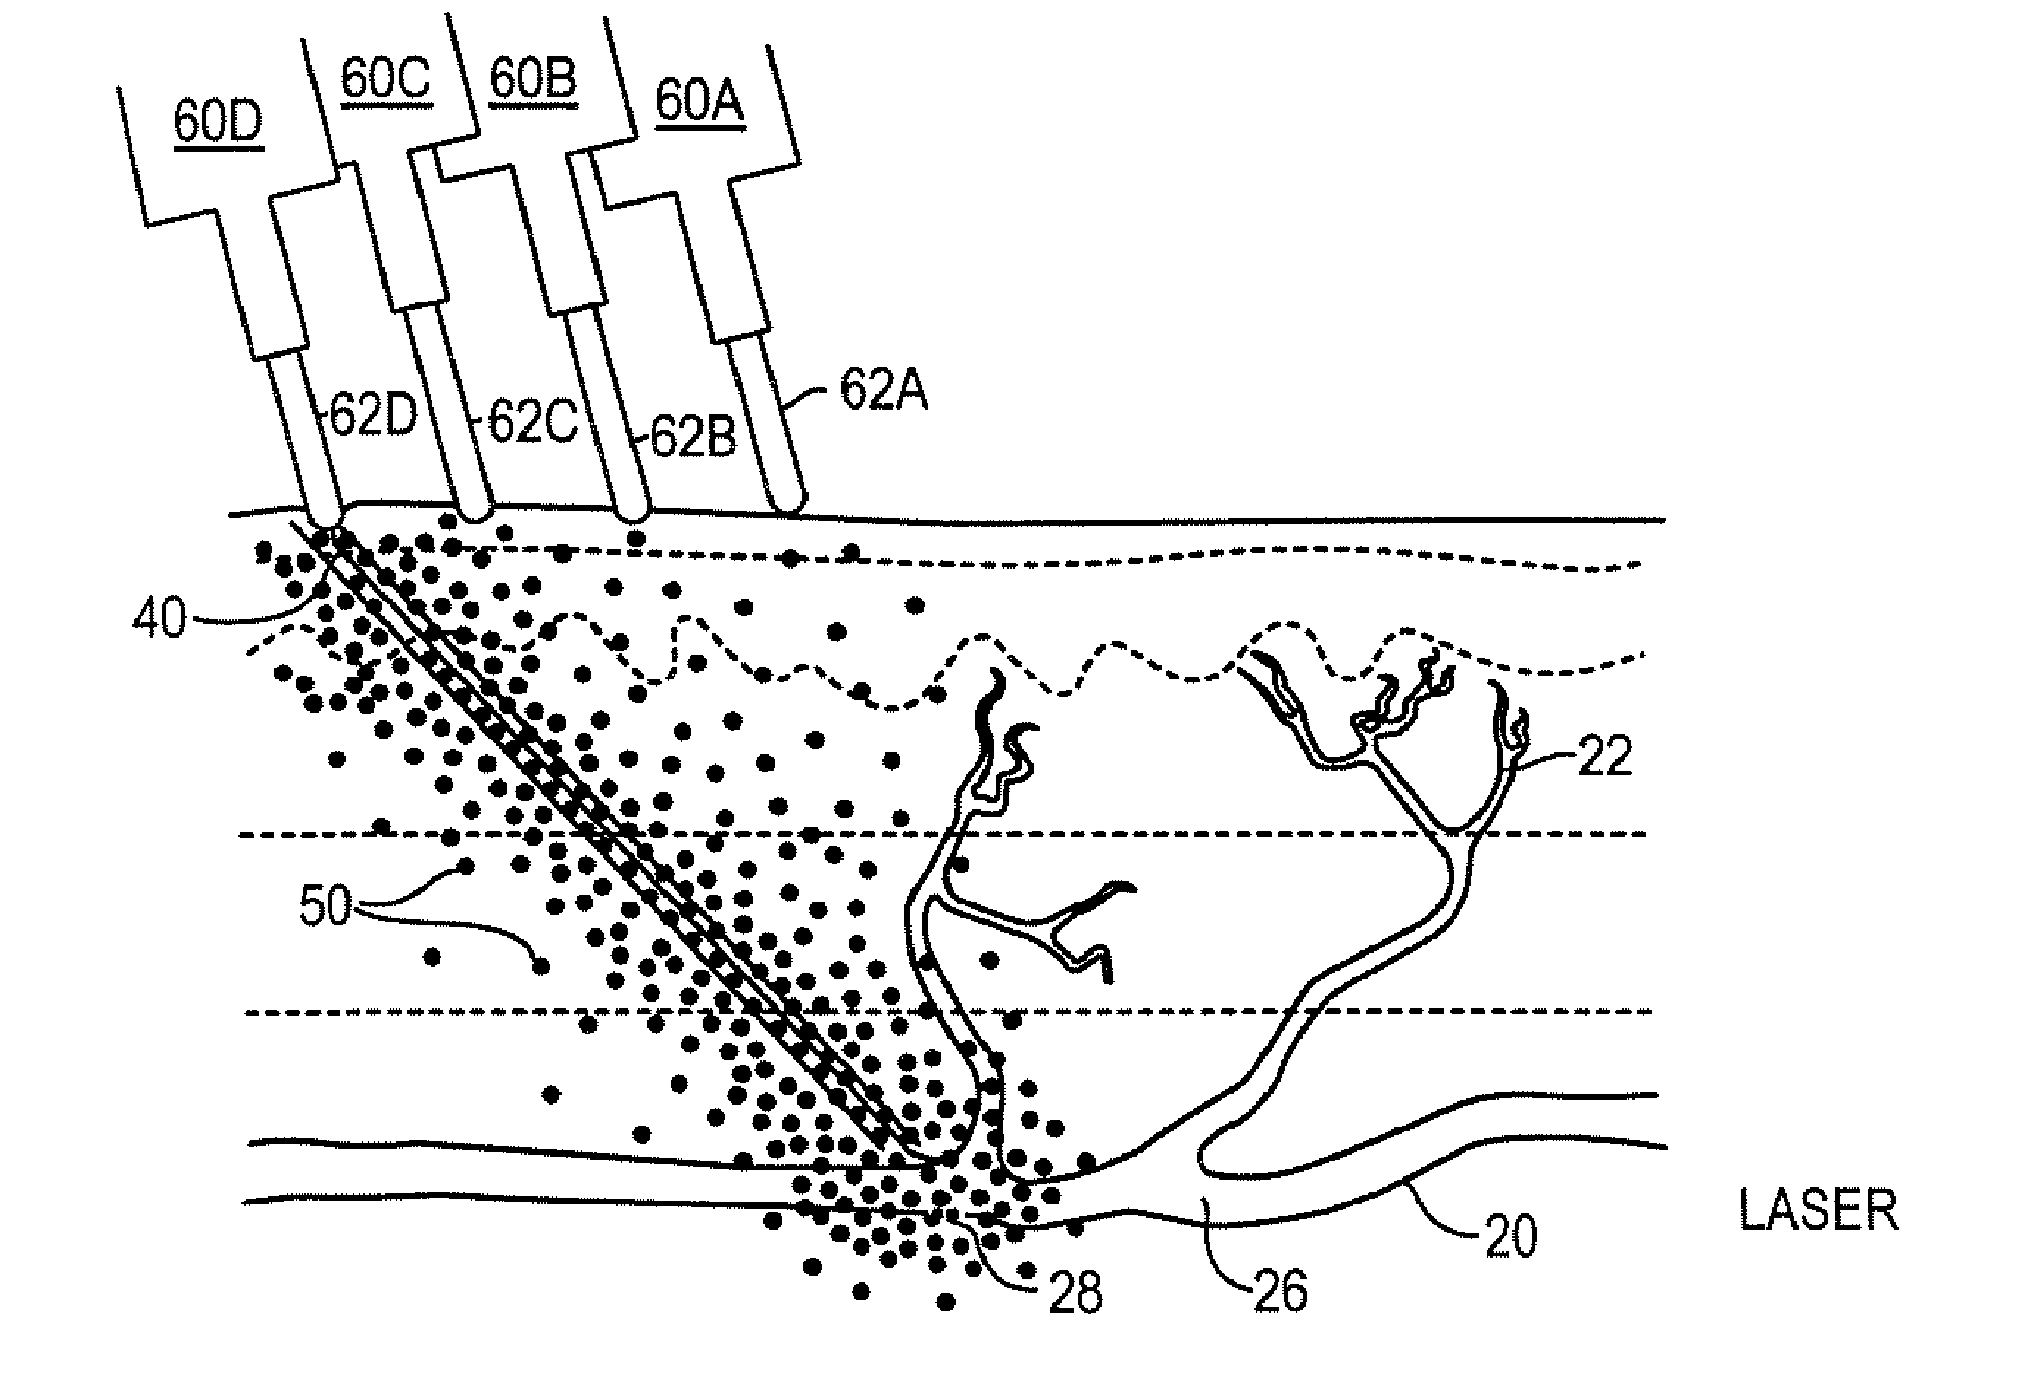 Method and kit for treatment of varicose veins and other superficial venous pathology